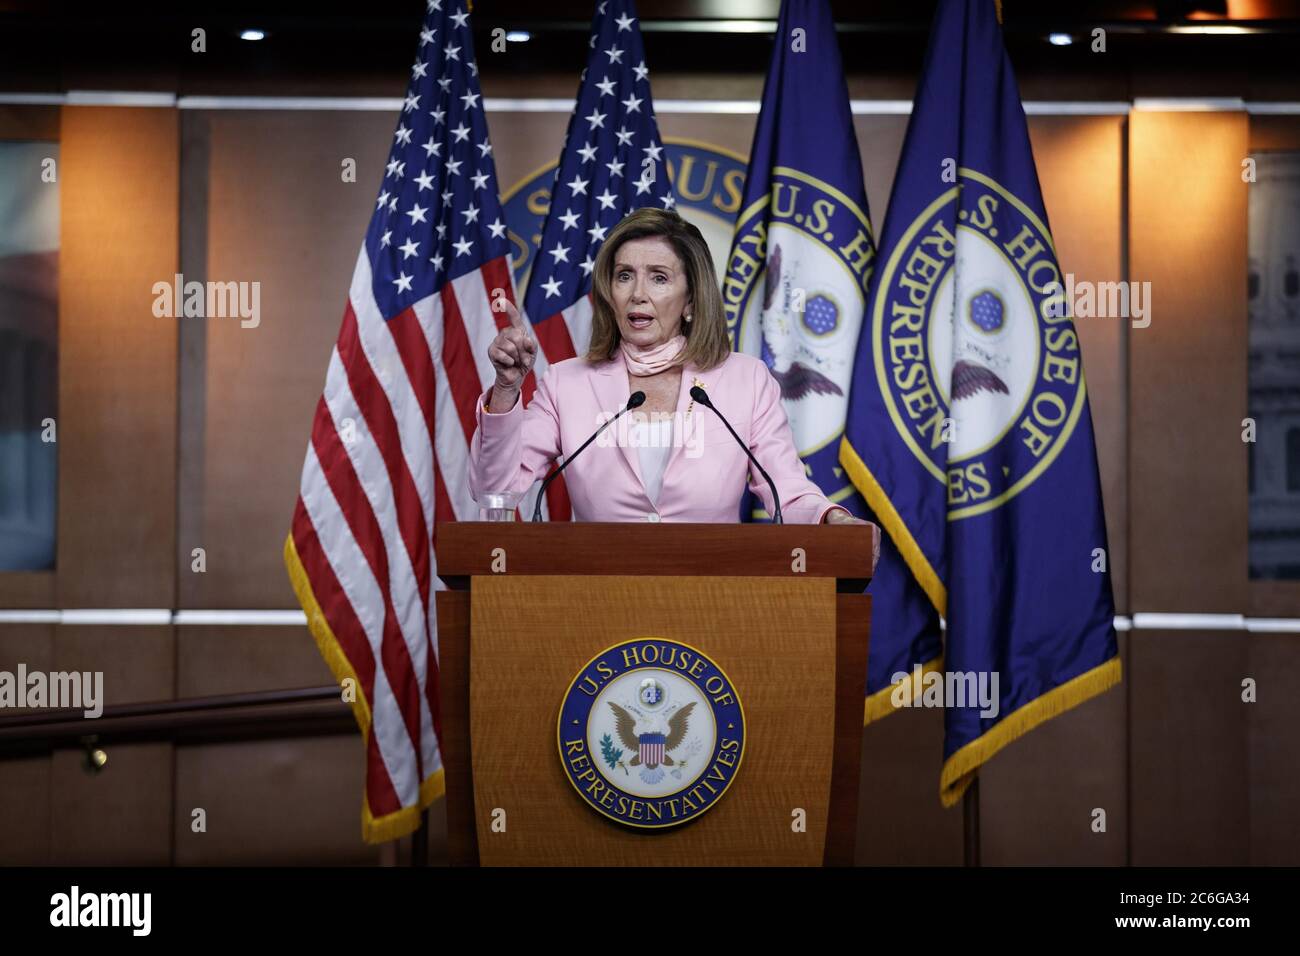 Washington, USA. 9th July, 2020. U.S. House Speaker Nancy Pelosi speaks during her weekly press conference on Capitol Hill in Washington, DC, the United States, on July 9, 2020. U.S. President Donald Trump's official withdrawal of the country from the World Health Organization (WHO) is 'an act of true senselessness,' U.S. House Speaker Nancy Pelosi said on Twitter. Credit: Ting Shen/Xinhua/Alamy Live News Stock Photo